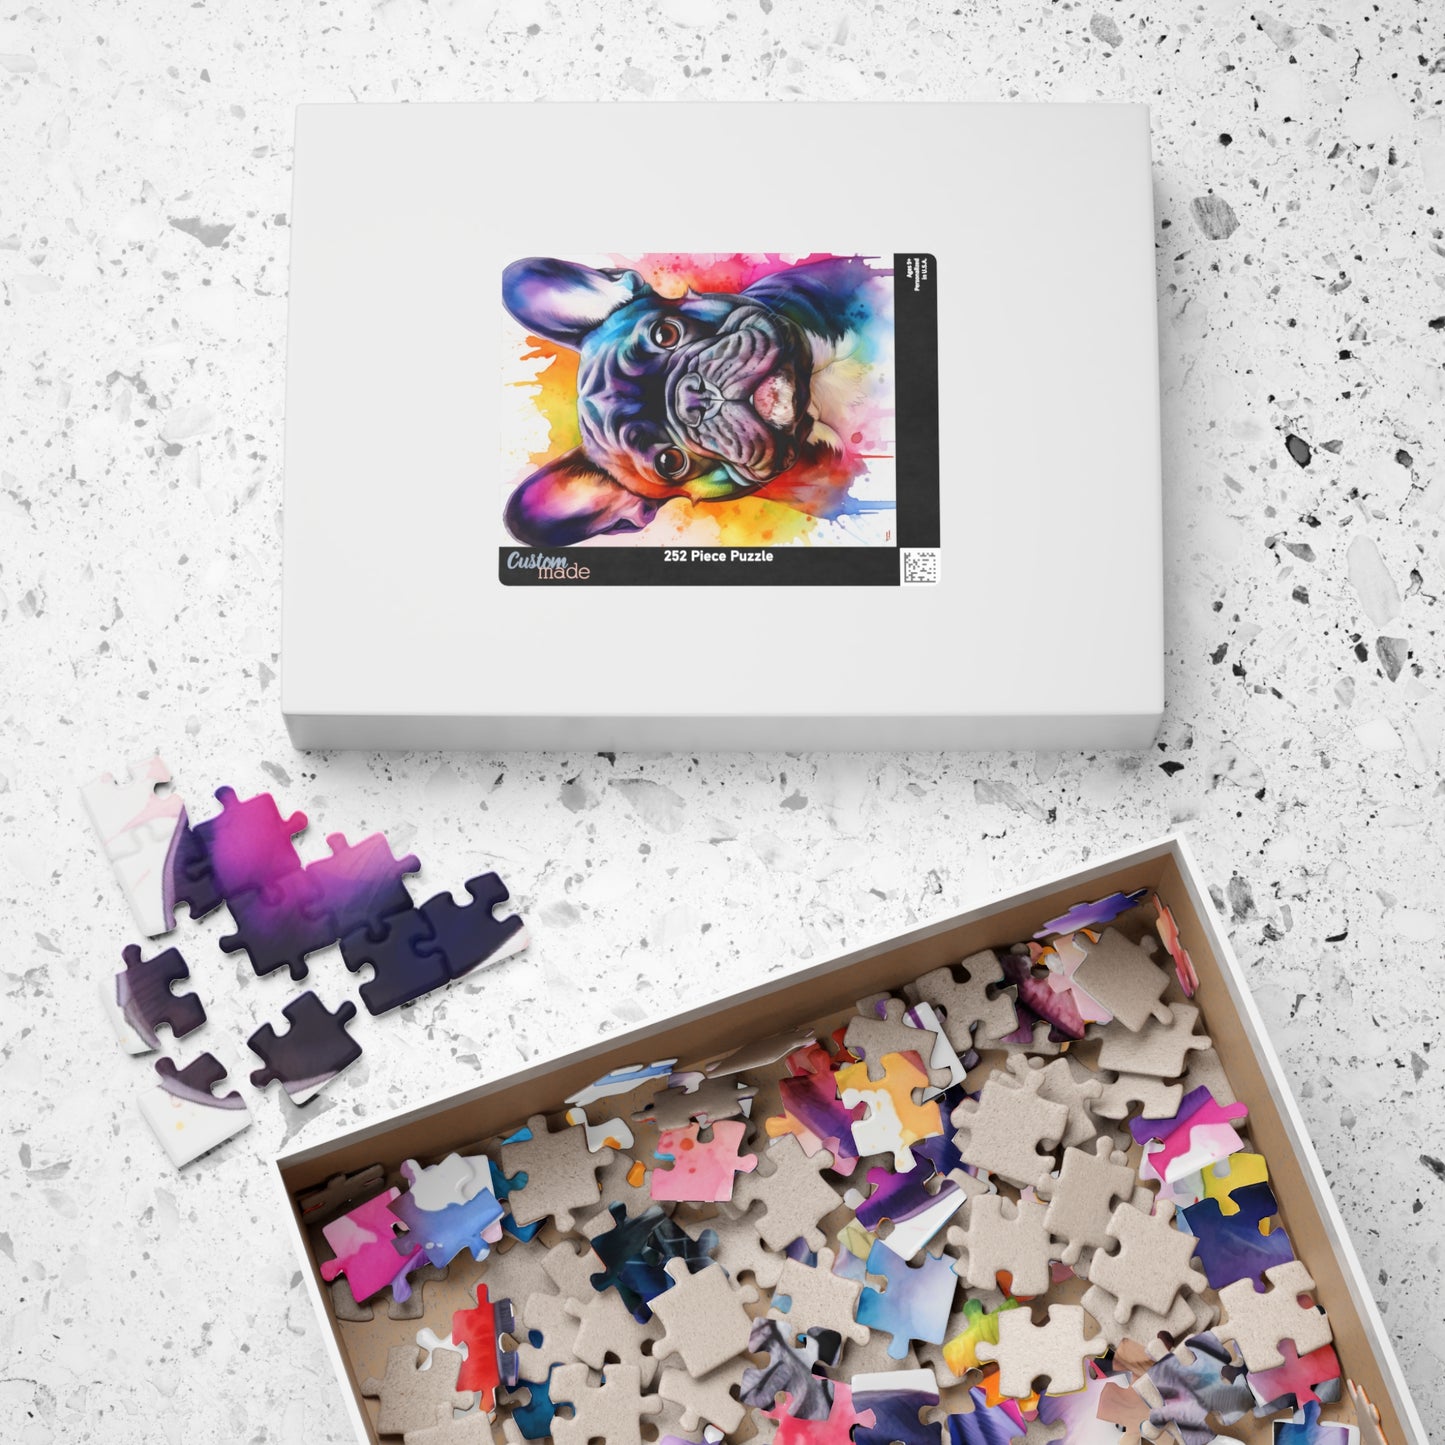 French Bulldog Color Blast Puzzle (110, 252, 520, 1014-piece) Watercolor Jigsaw Jig Saw Family Pet K9 Canine Friend Buddy Tabletop Game